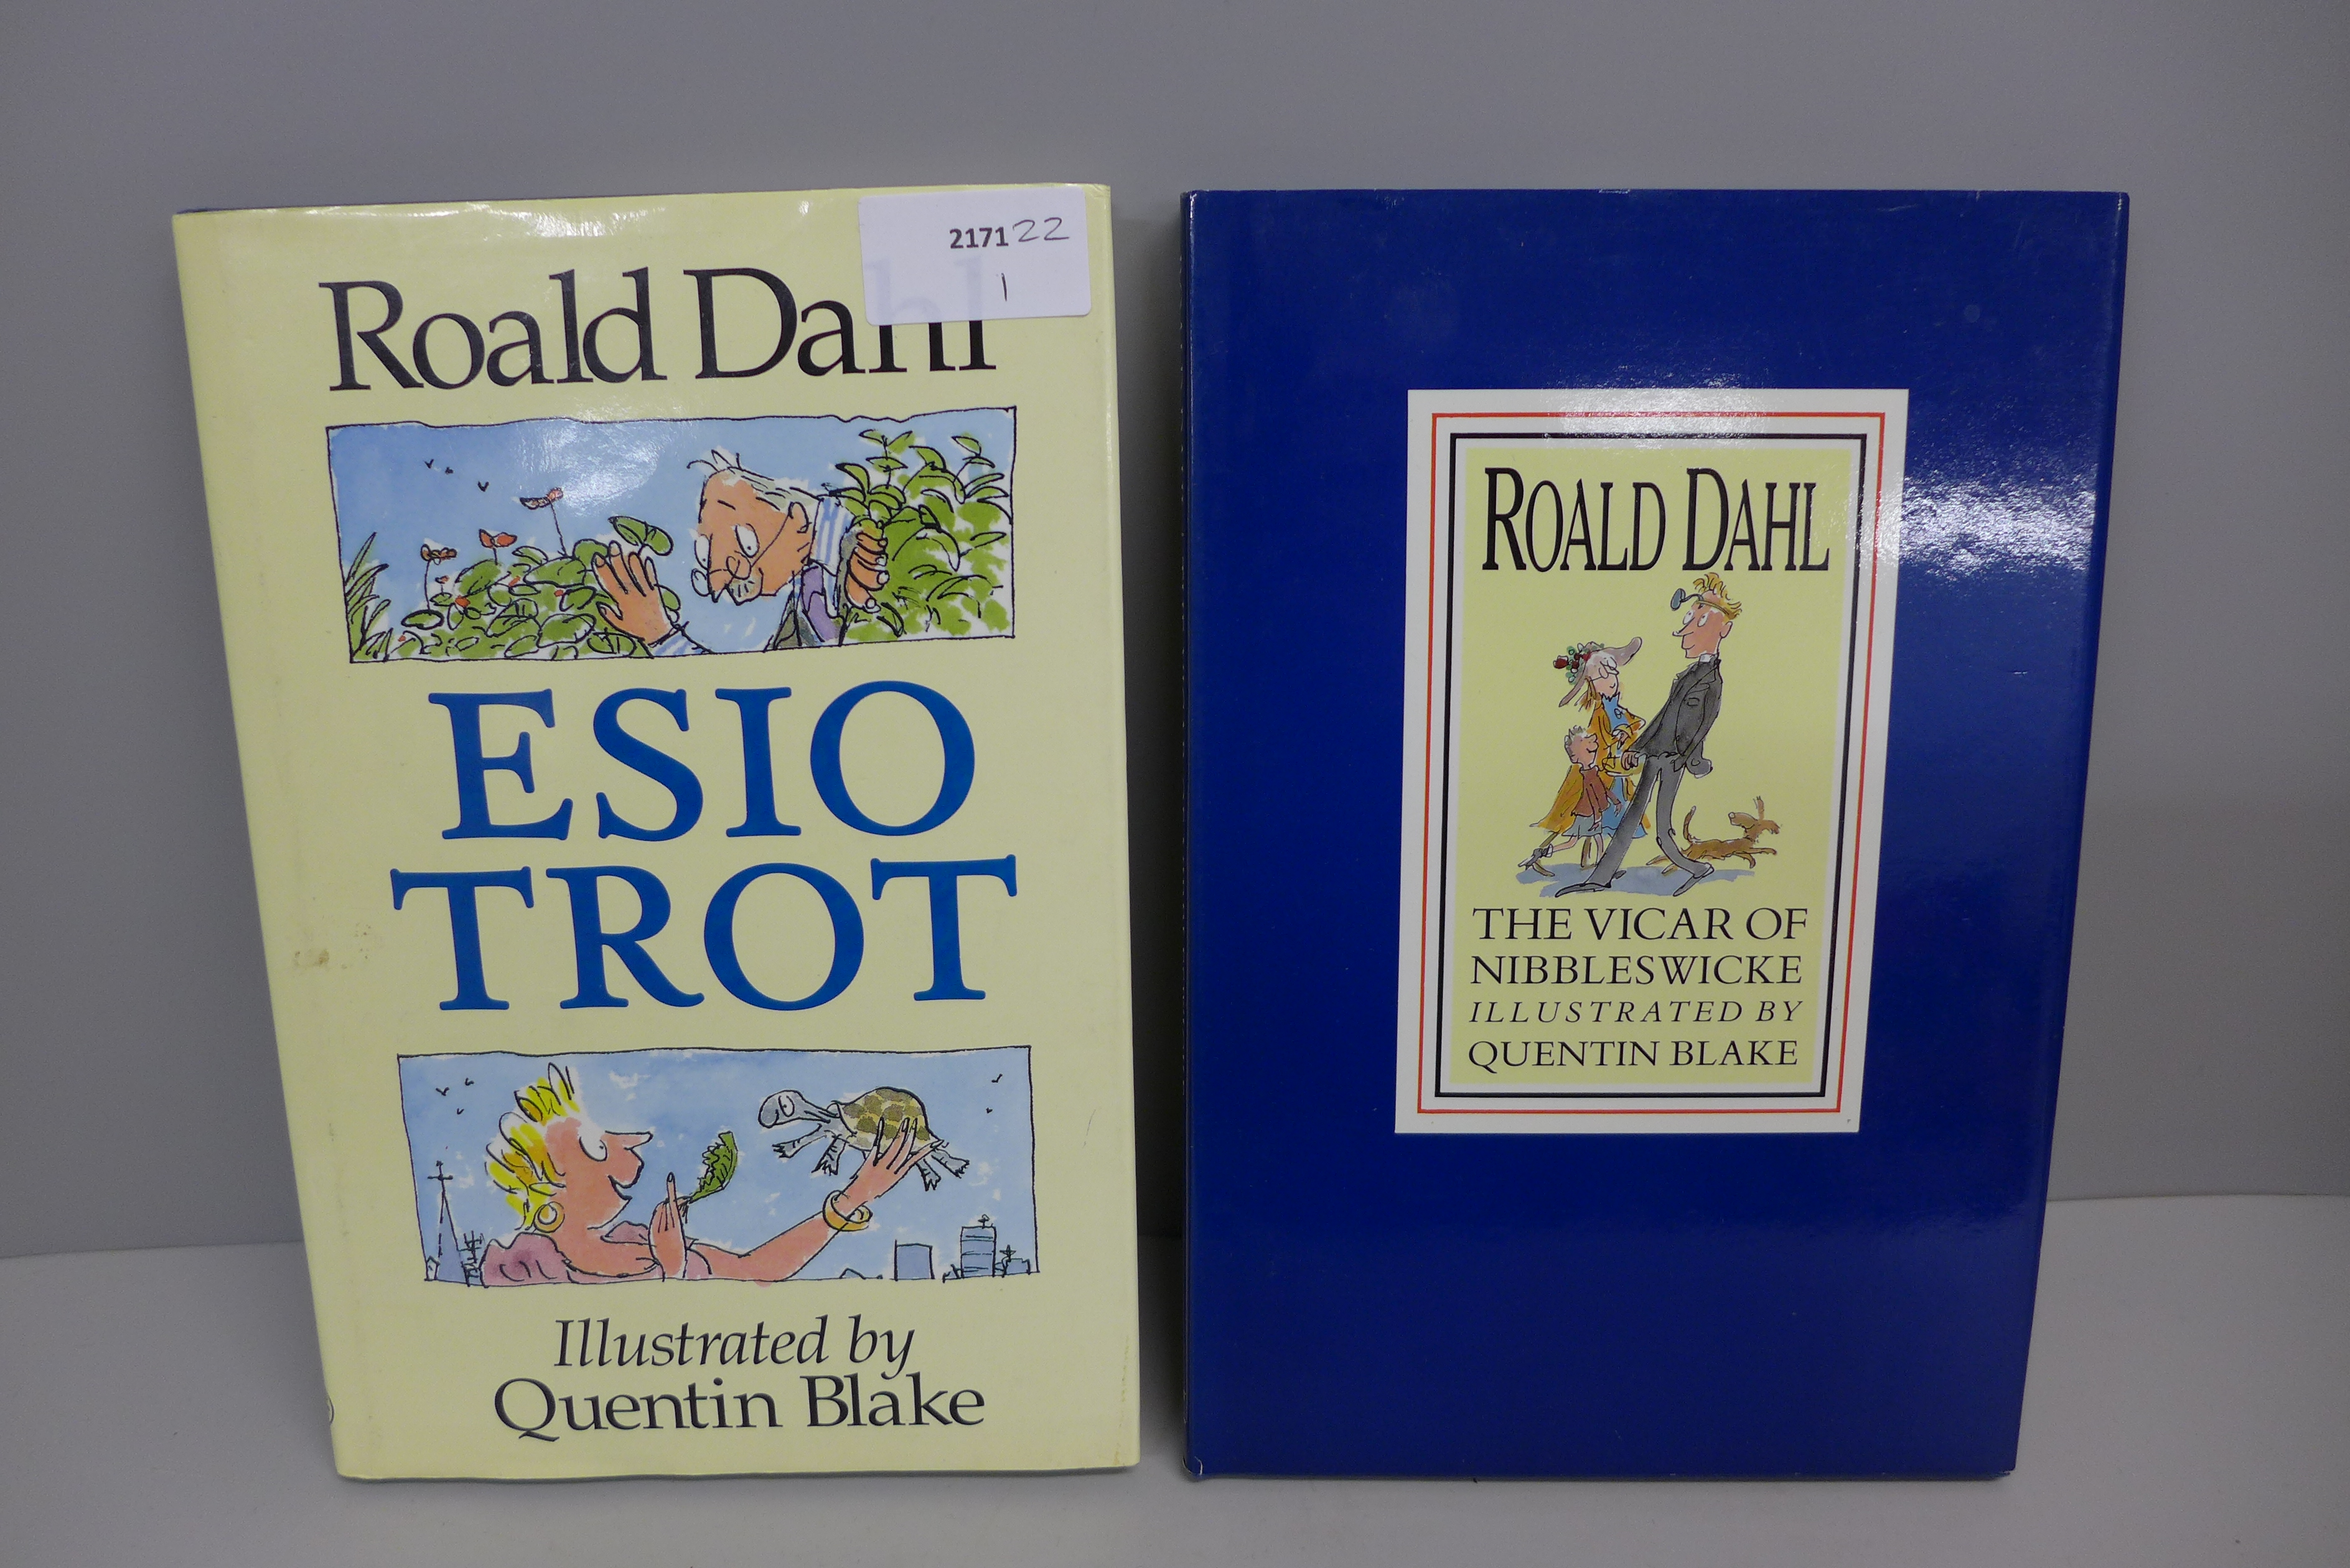 Two first edition books by Roald Dahl; Esio Trot (Cape, 1990) and The Vicar of Nibbleswicke (